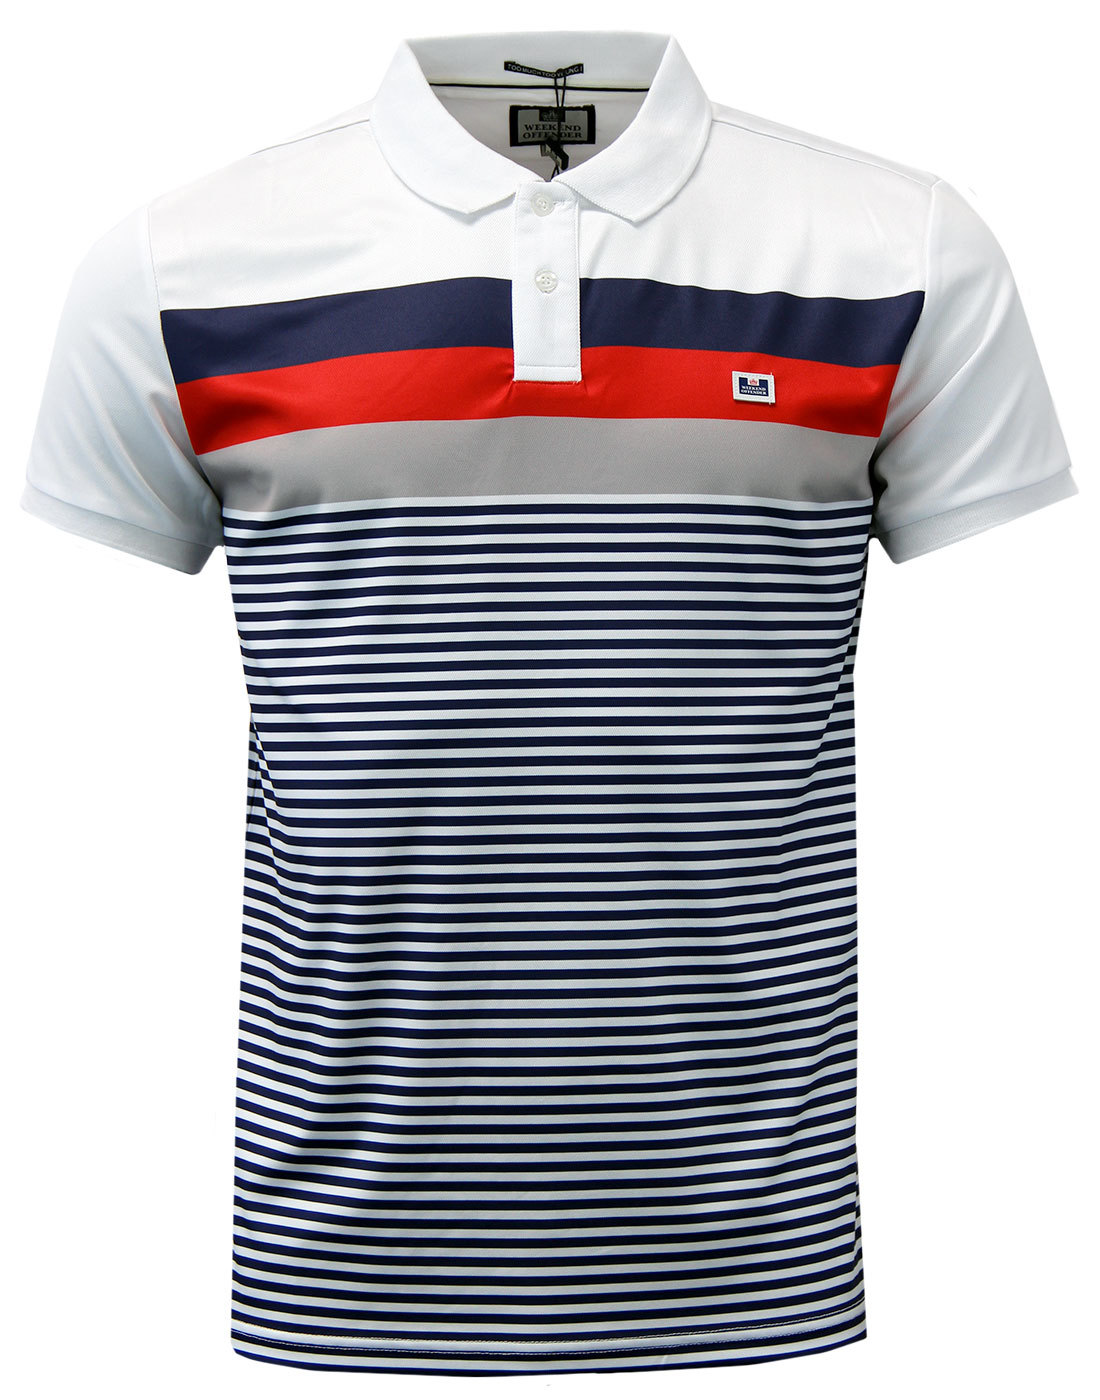 Moselle WEEKEND OFFENDER Retro Casuals Stripe Polo